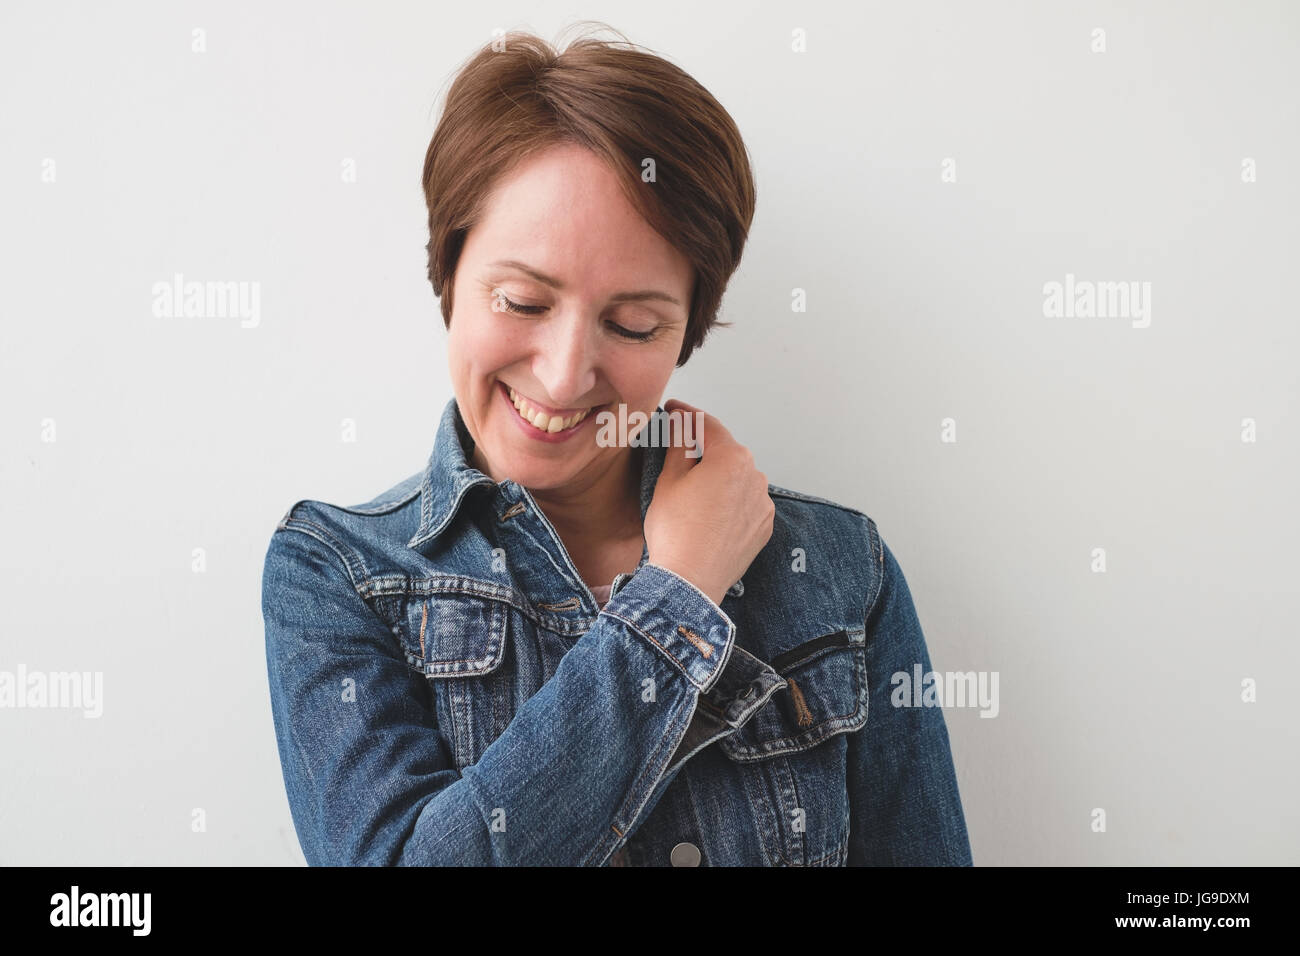 Close up portrait of mid adult woman laughing Banque D'Images